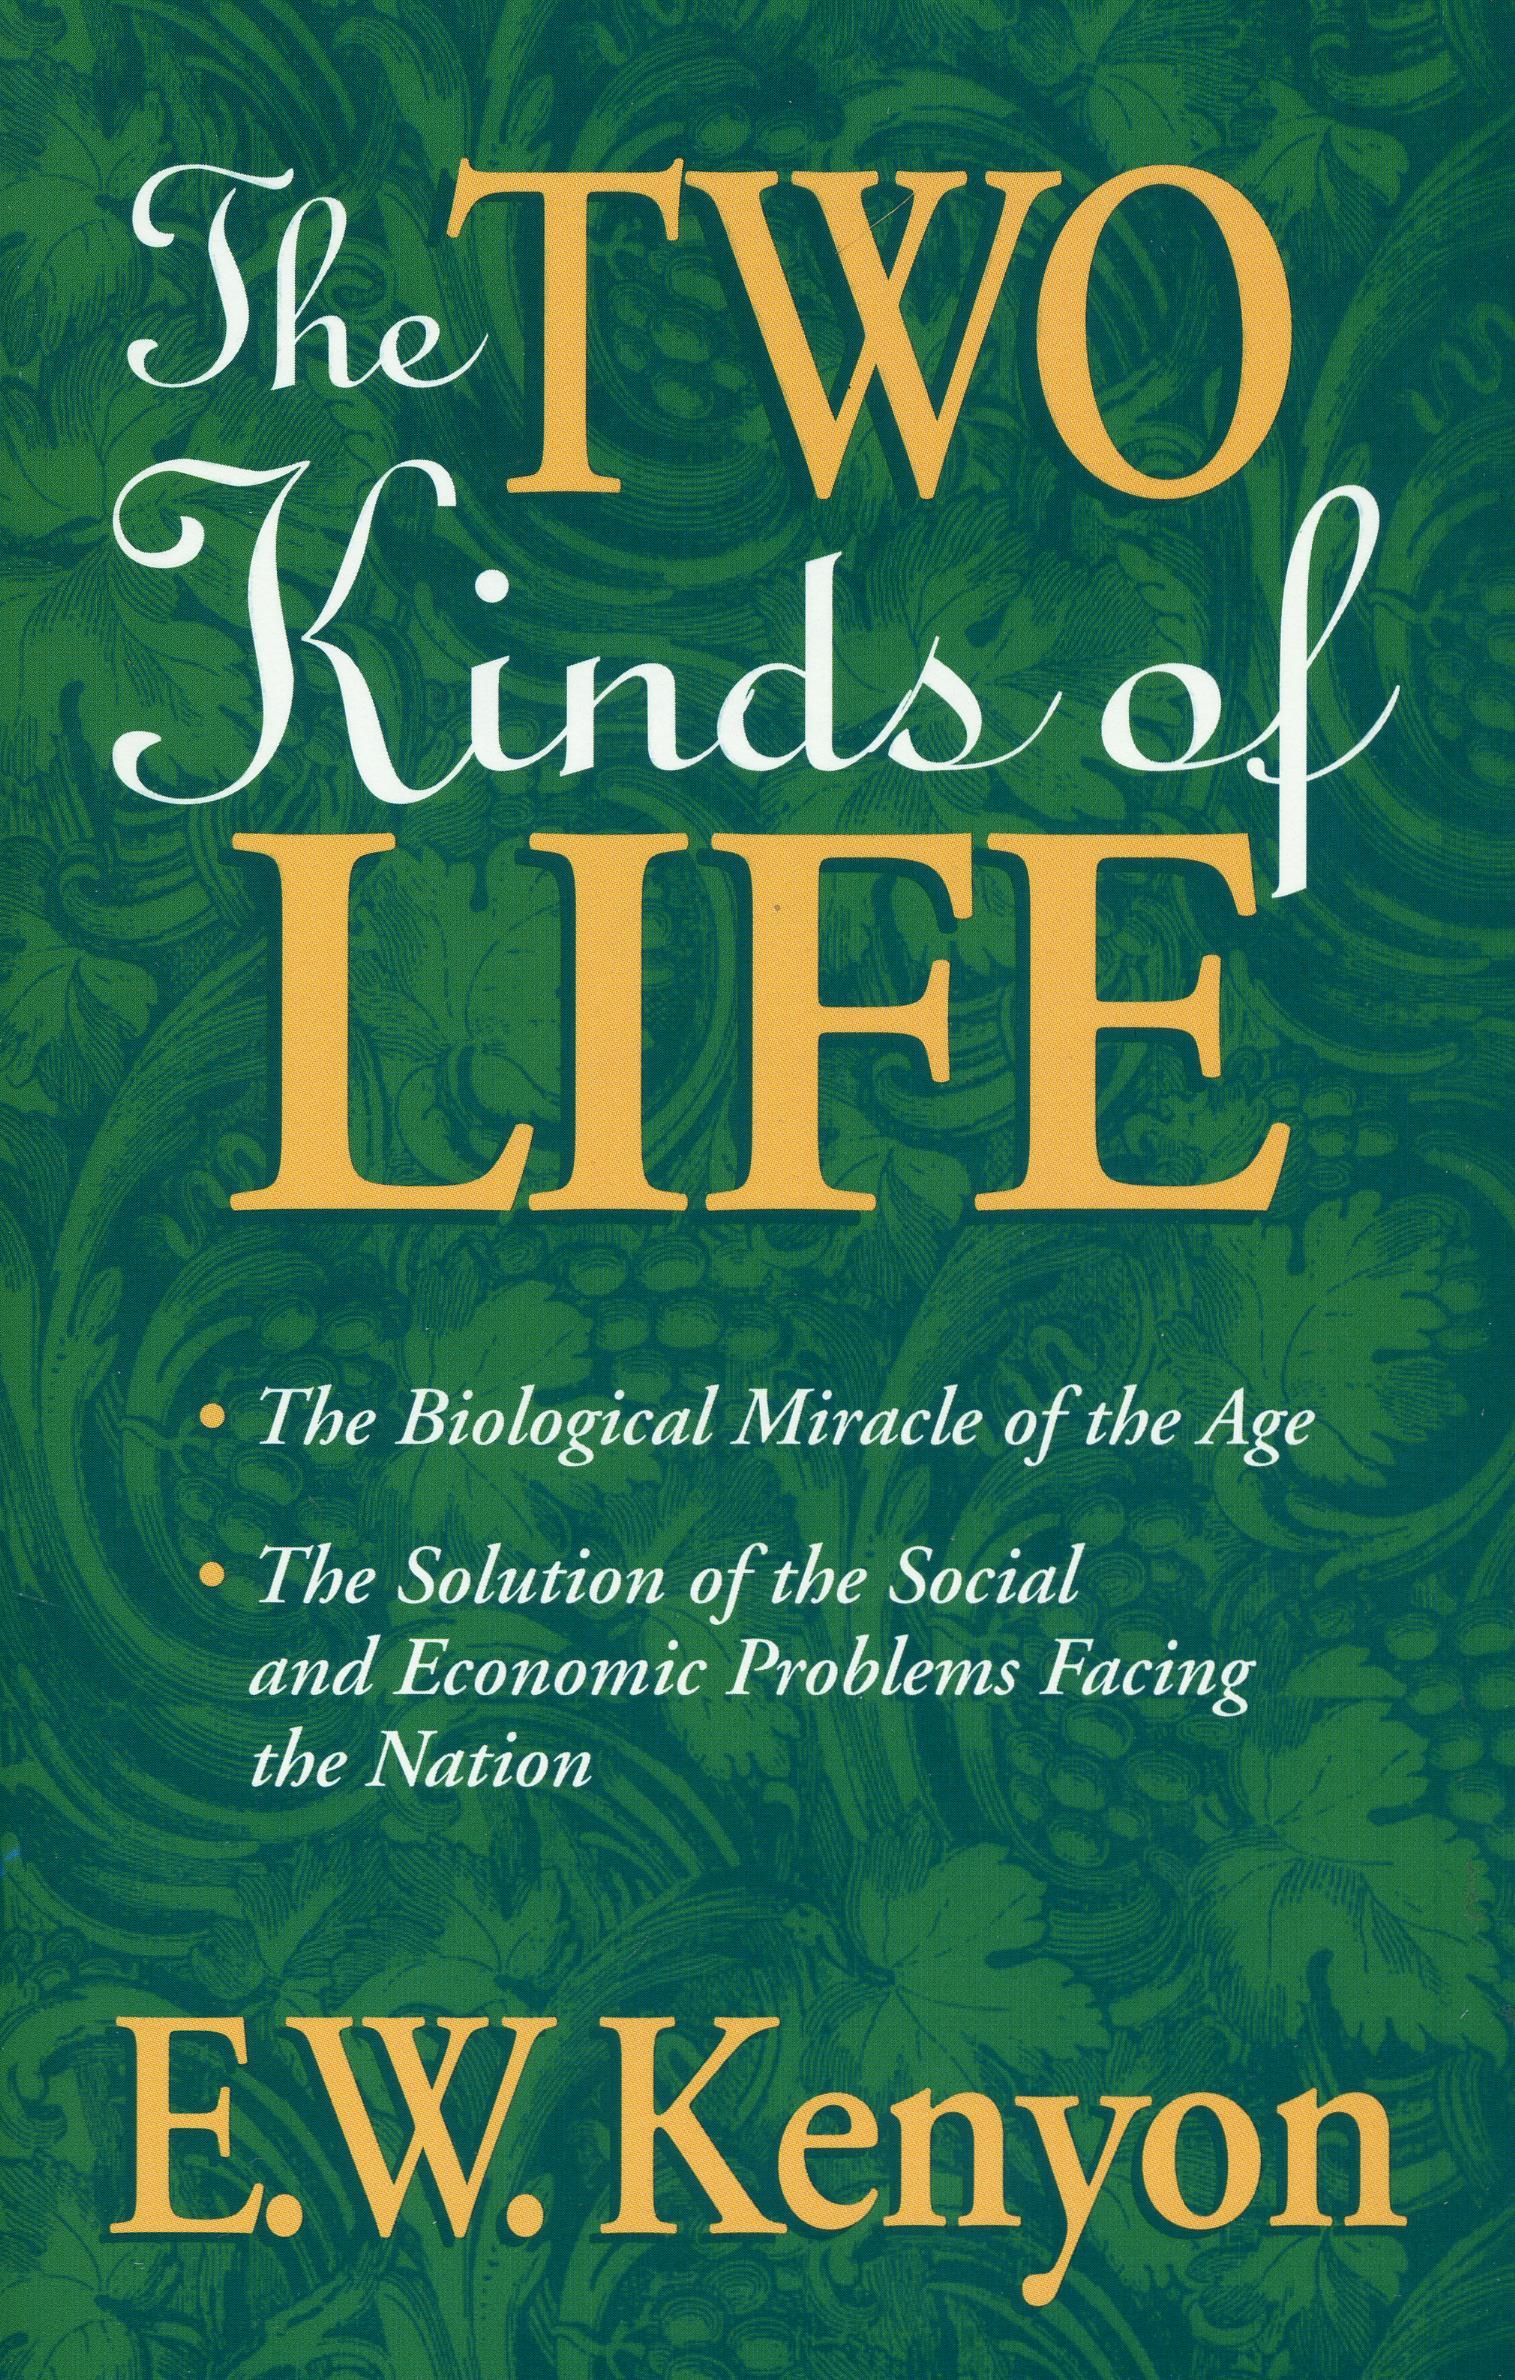 Englische Bücher - E.W. Kenyon: The Two Kinds of Life